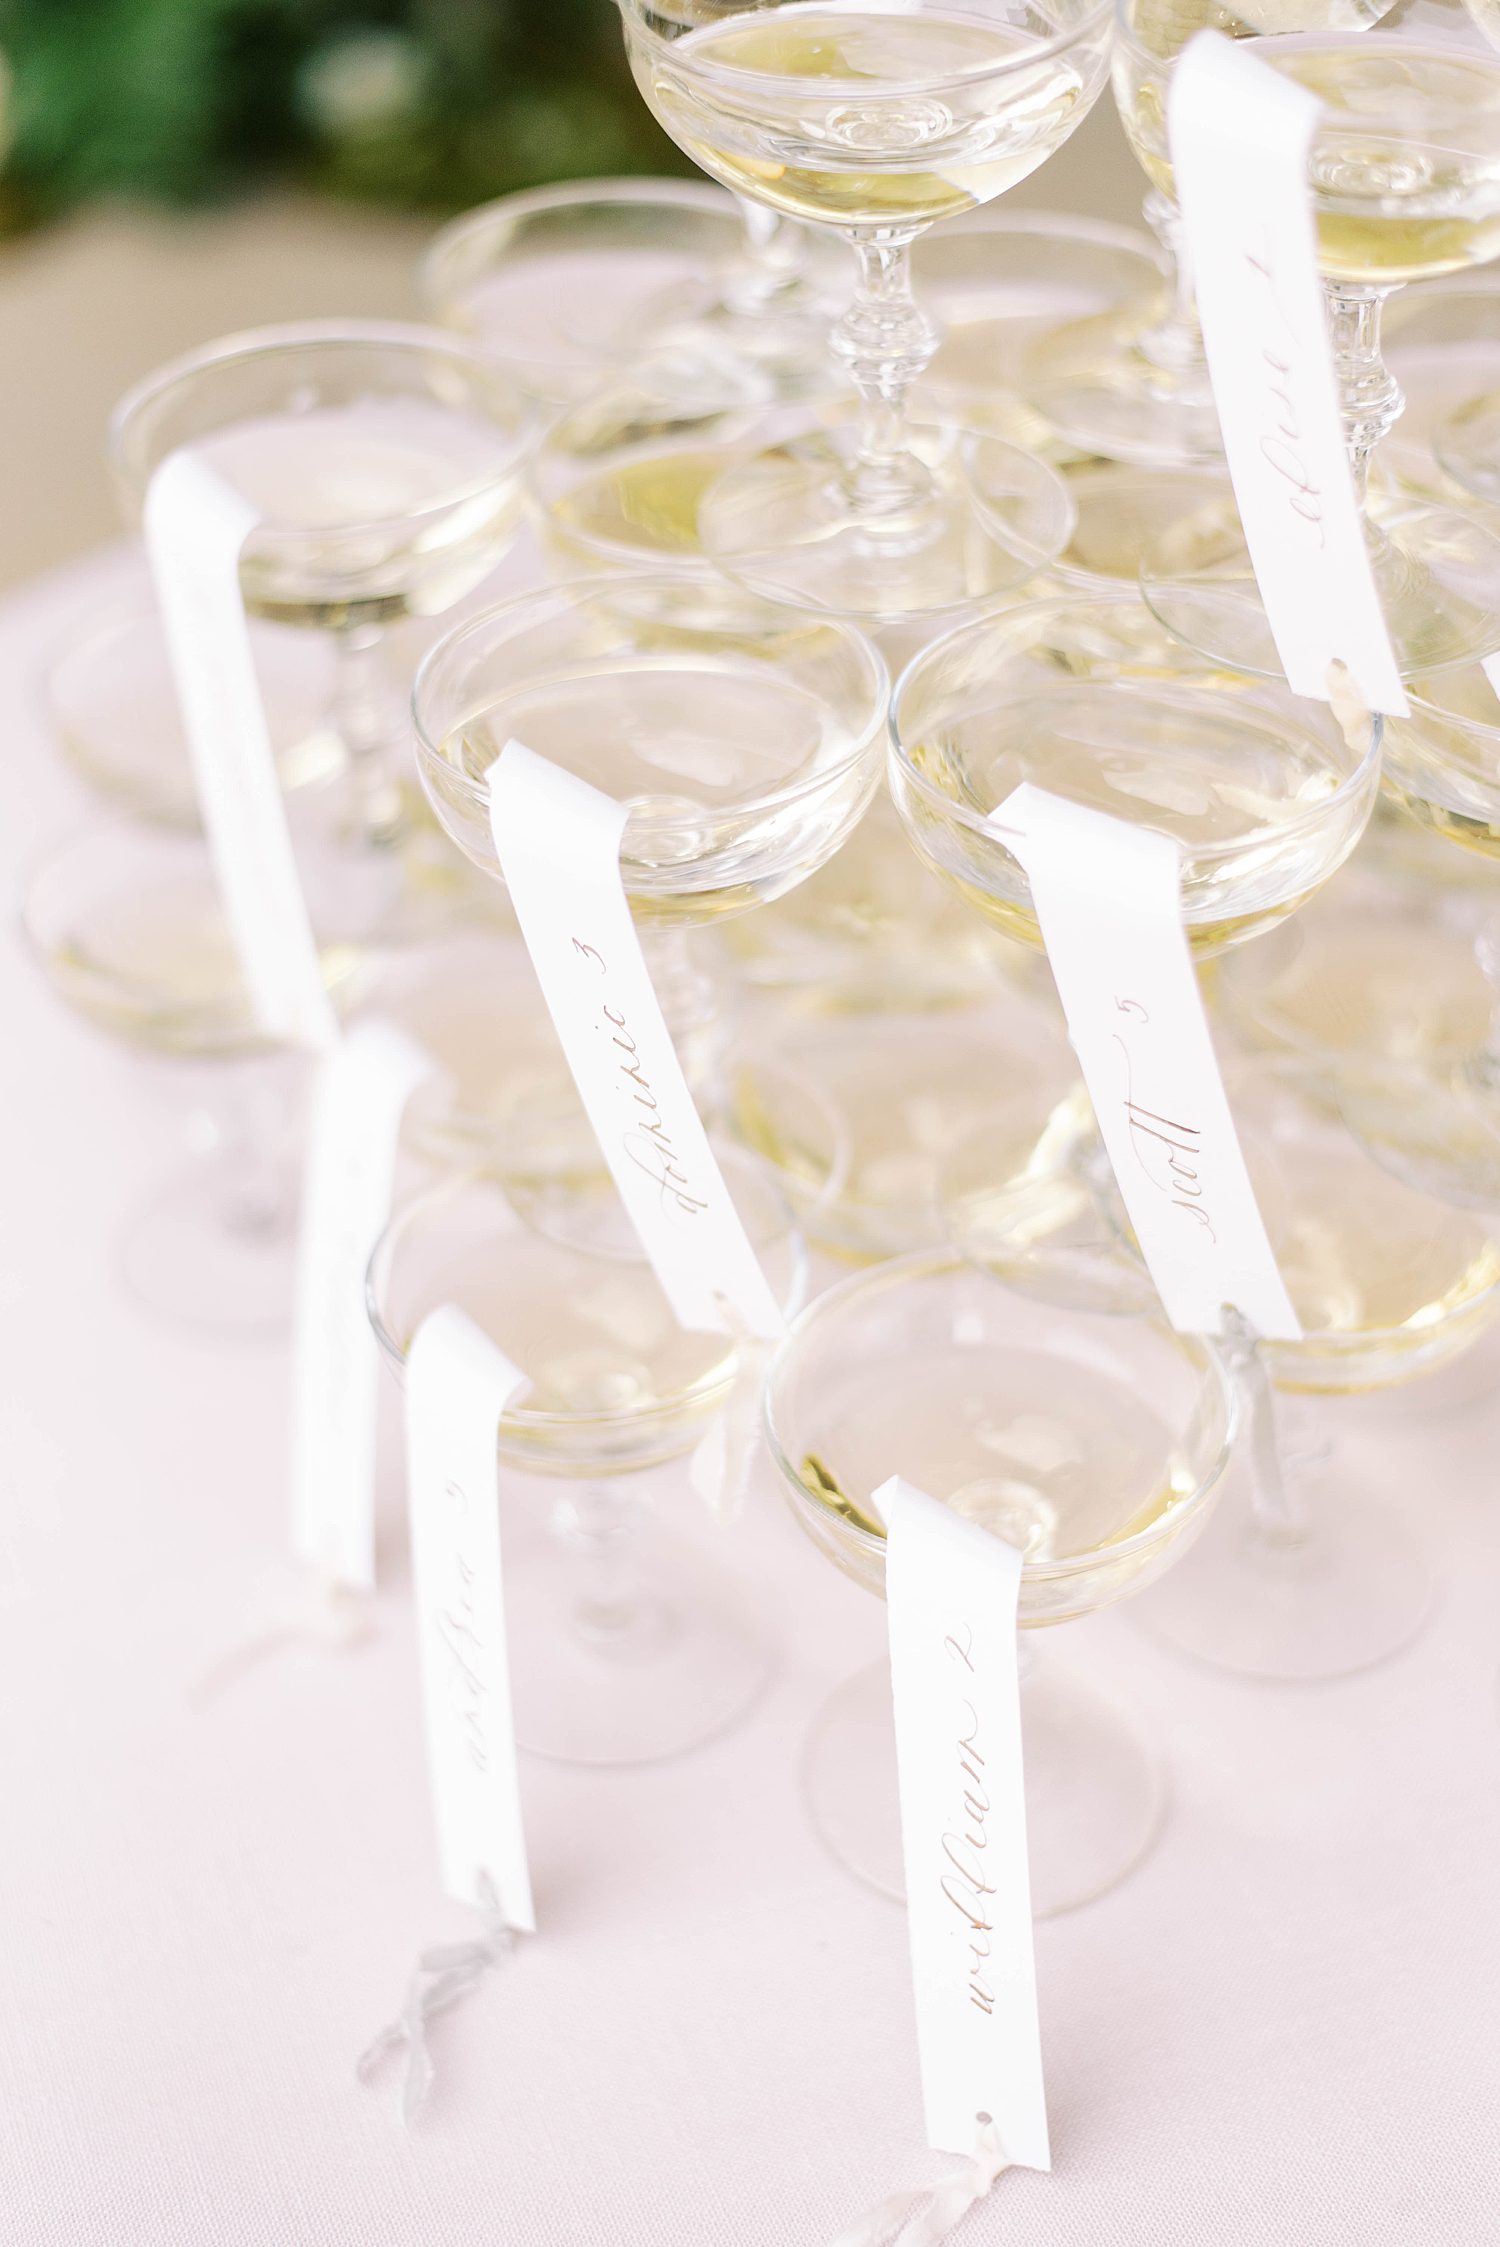 champagne glasses with tags for wedding reception 